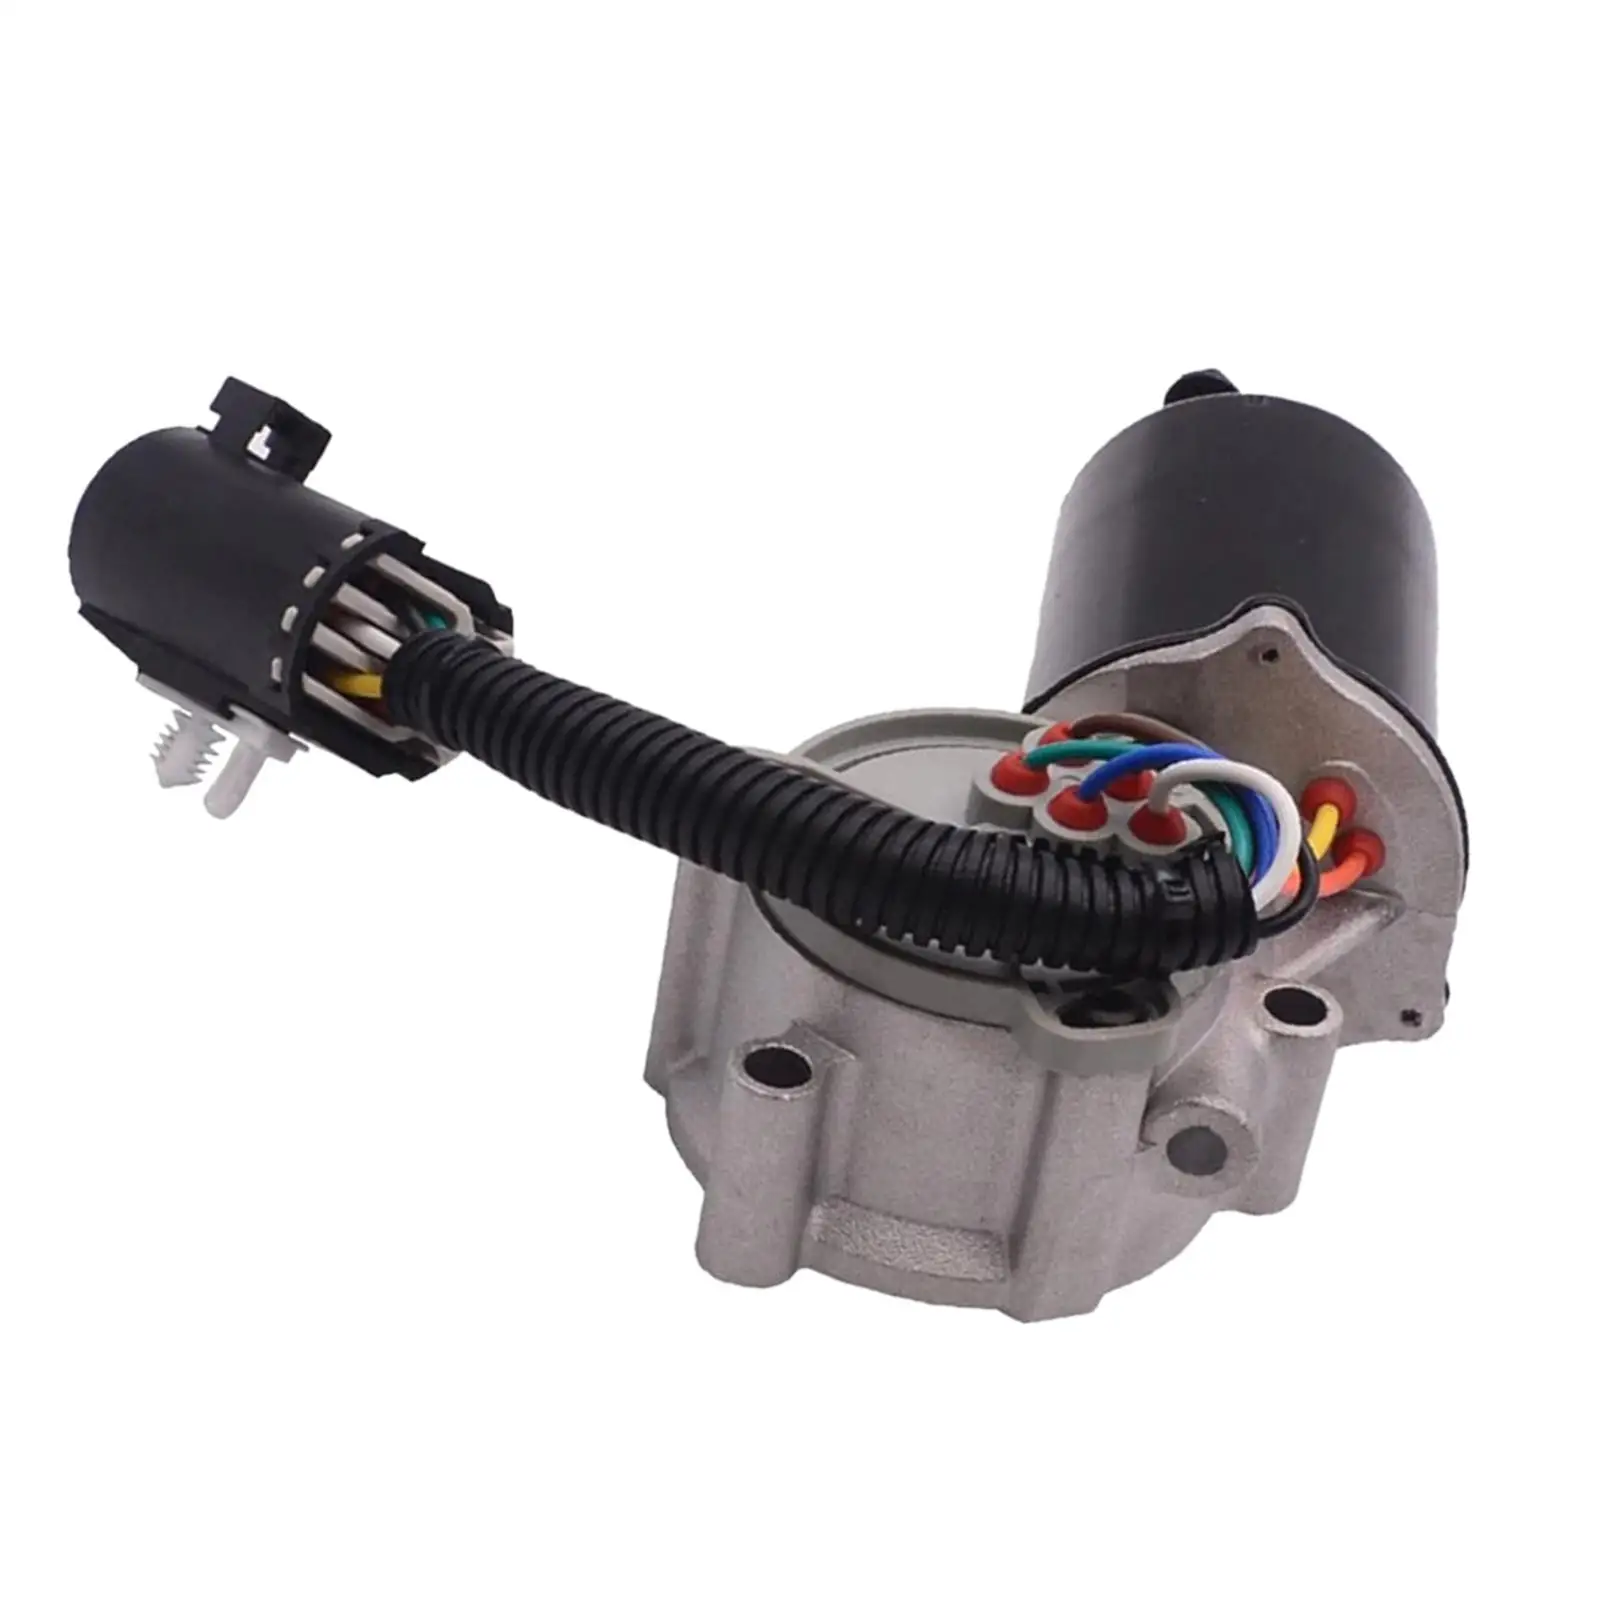 Shift Motor Replaces Car Accessories Durable High Performance Premium Spare